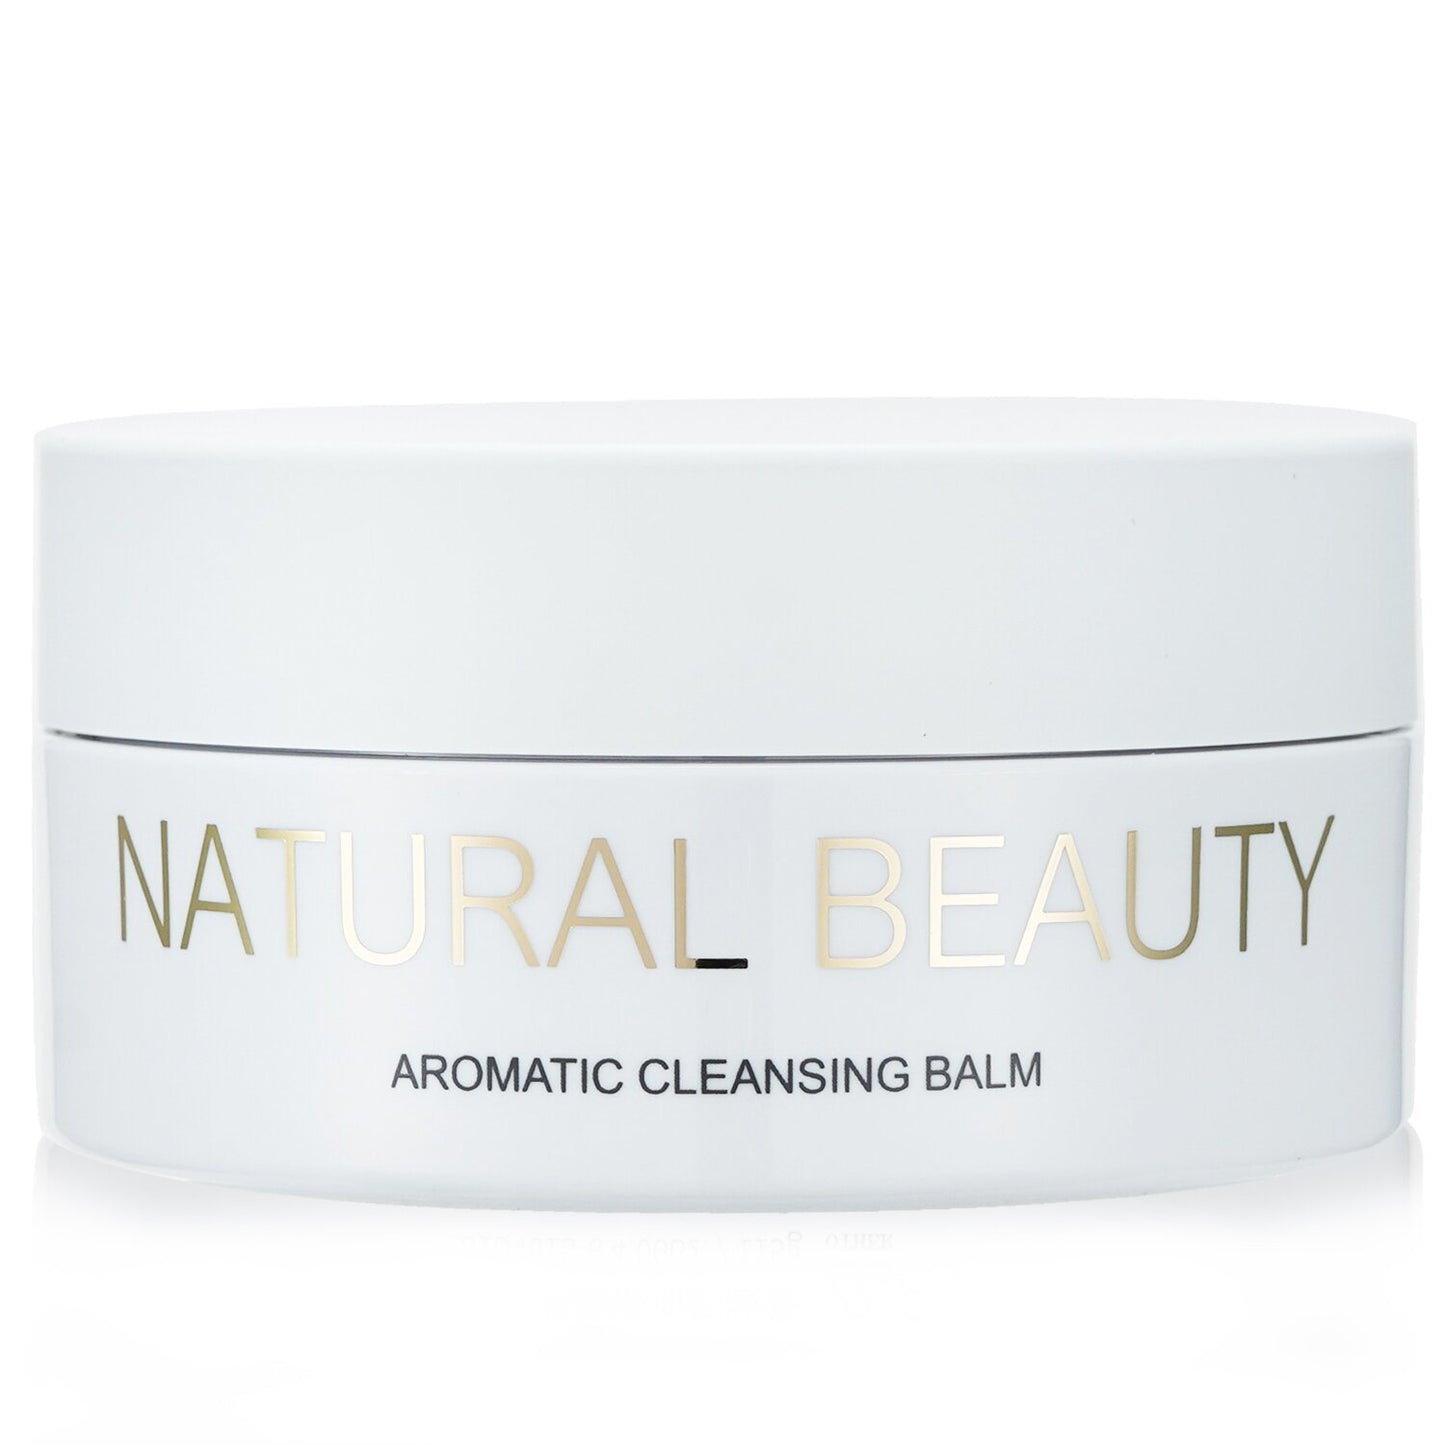 NATURAL BEAUTY - Aromatic Cleansing Balm 81D401-8 / 123497 115g/4.06oz - lolaluxeshop